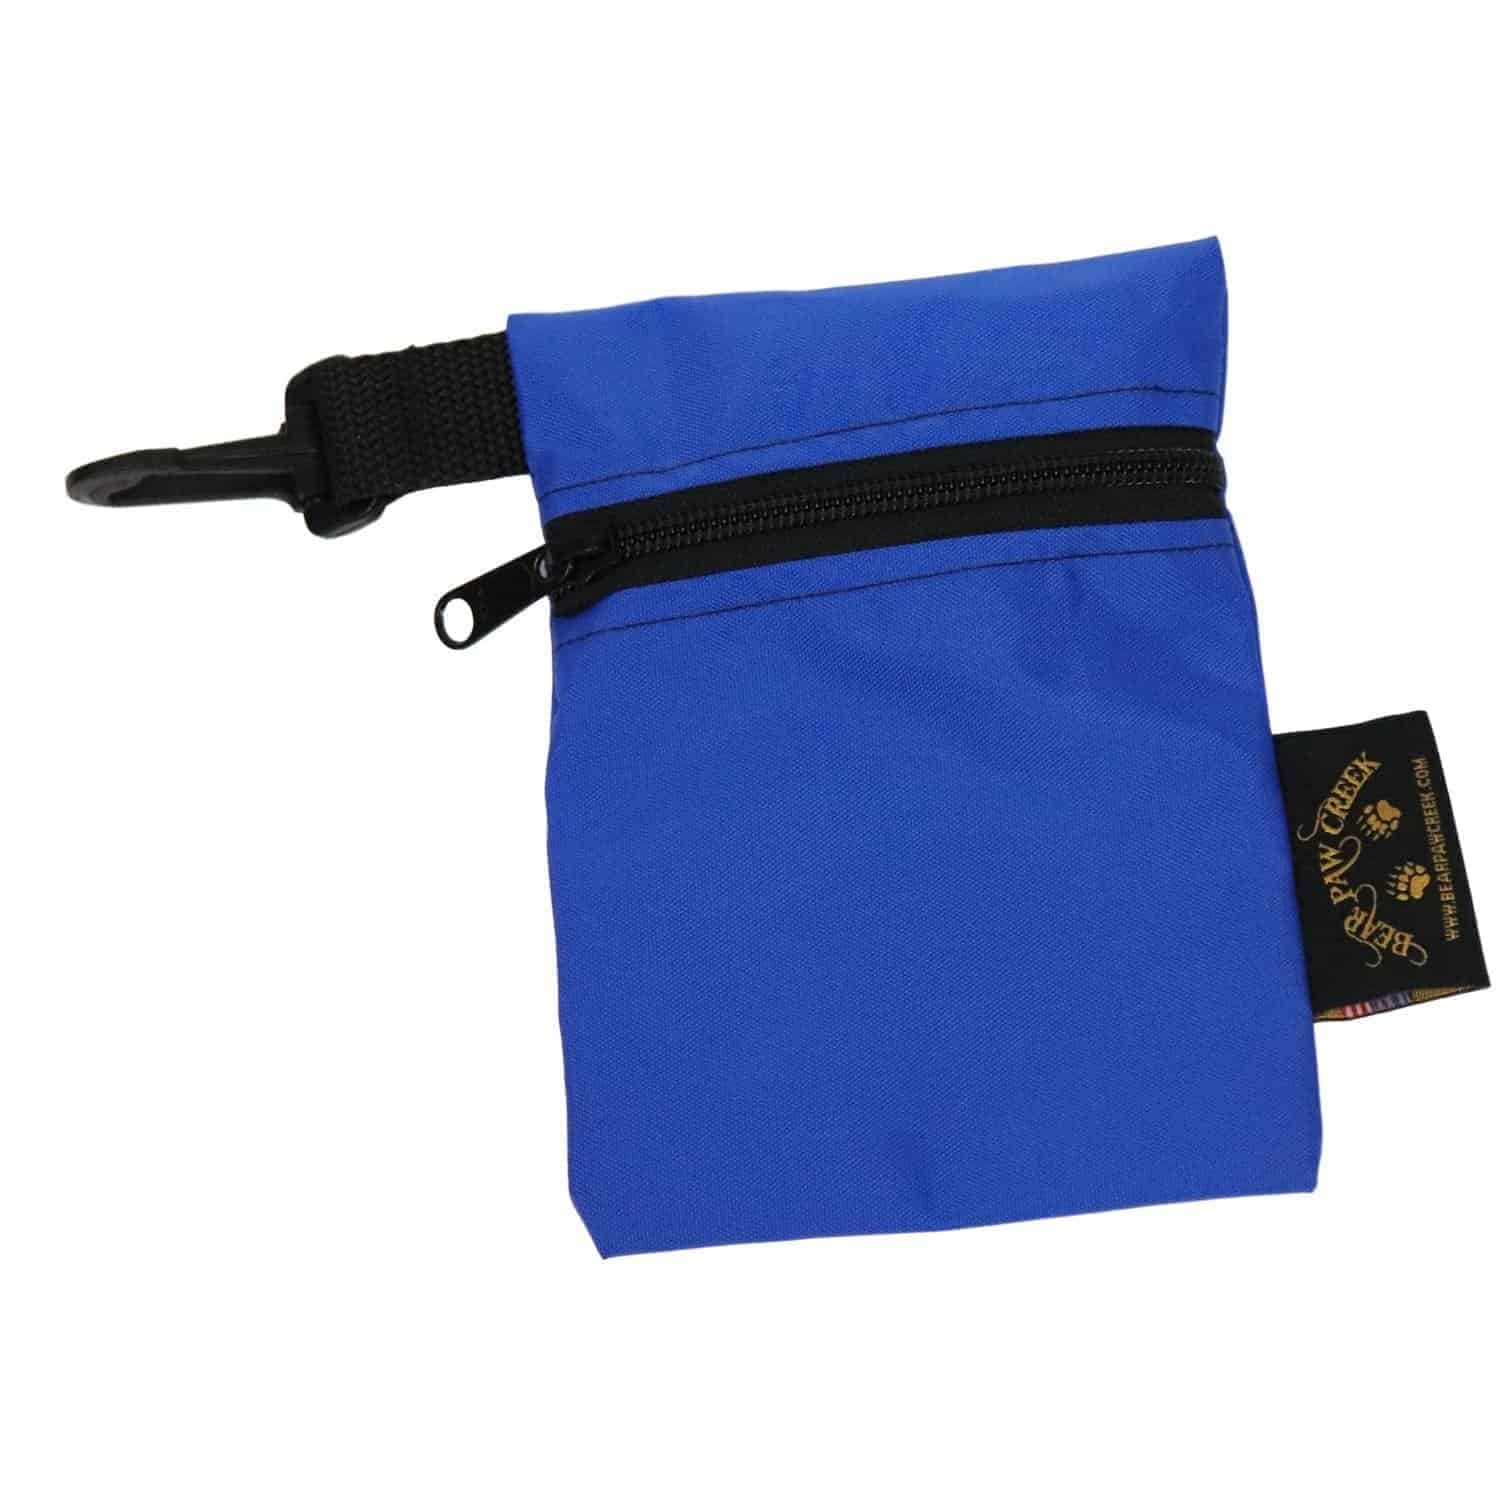 Versatile Zipper Bags For Puzzle Storage or First Aid Kits